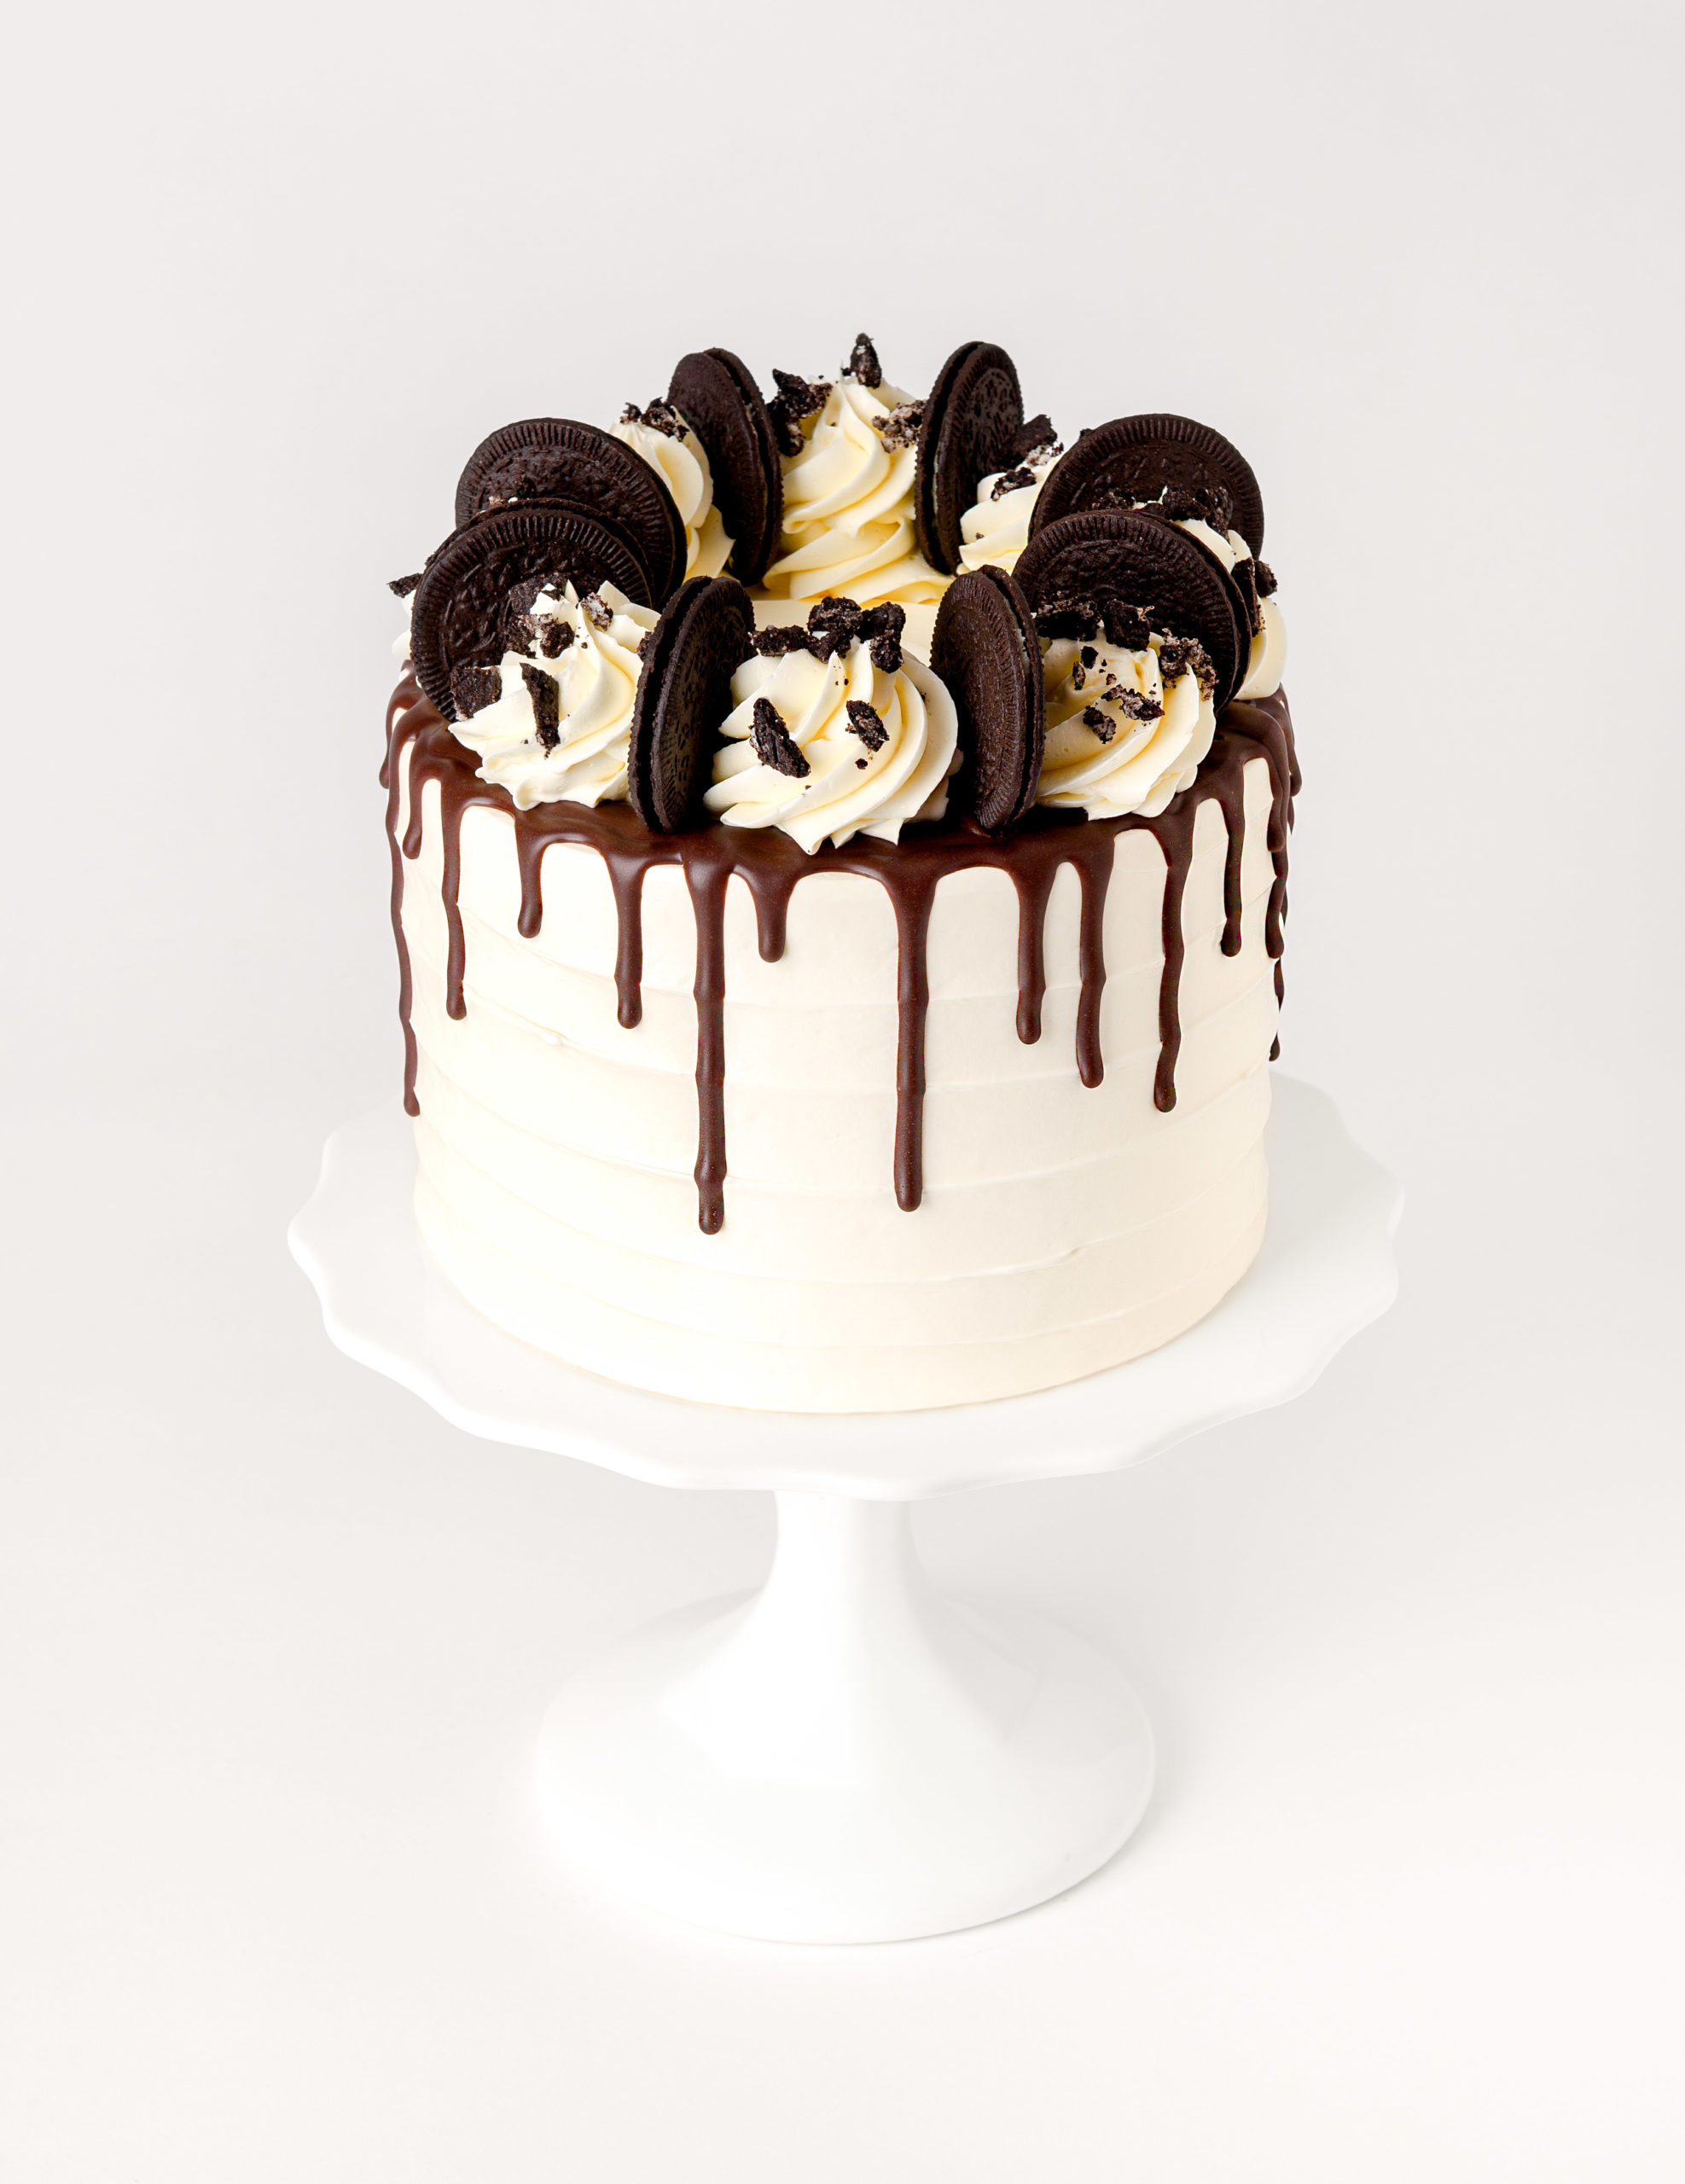 Extreme Cookies 'n Cream Oreo Cake - Crazy for Crust